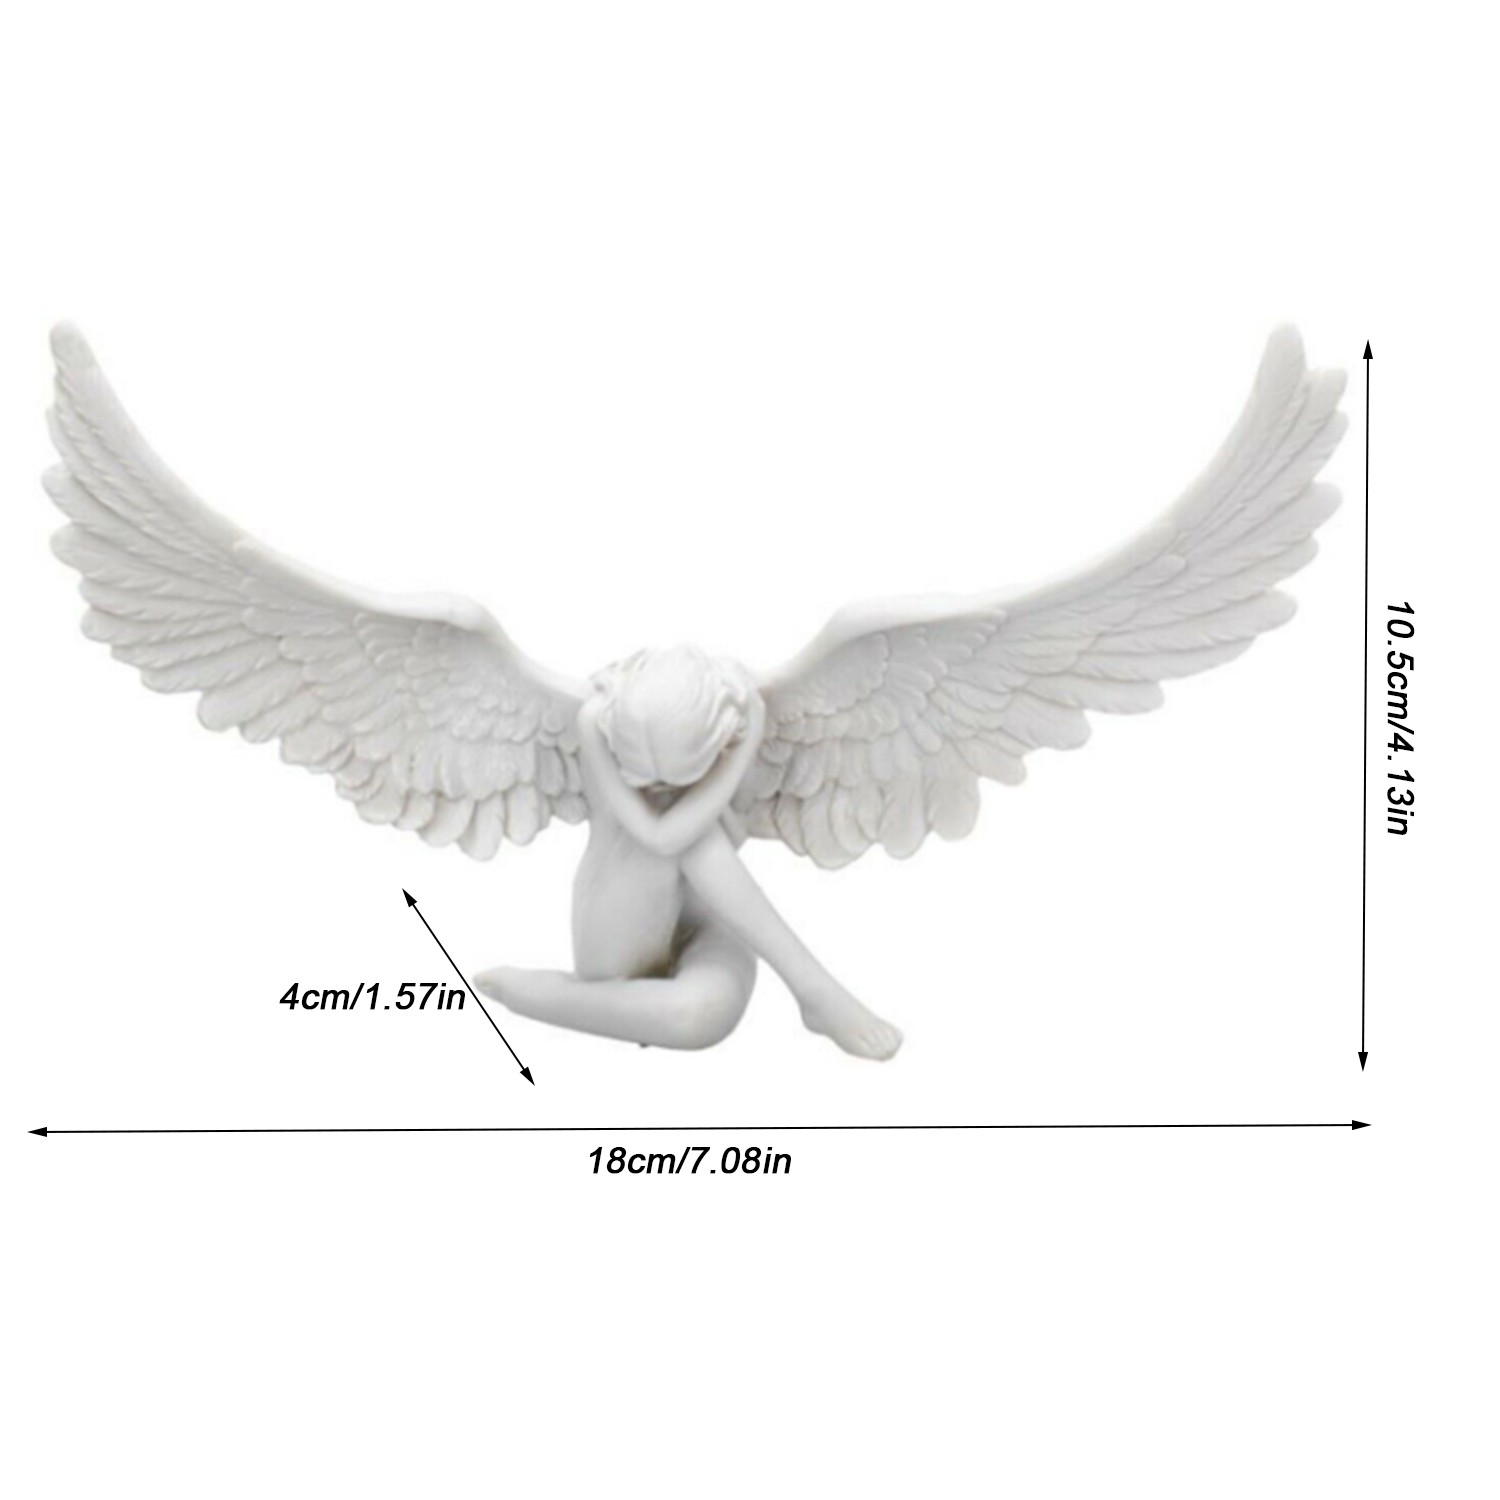 MIOSHOP Desk Redemption Decorative Statue Resin Angel Statue Yard Lawn Patio with Open Wings Ornaments Home Gardening Decoration Angel Sculpture